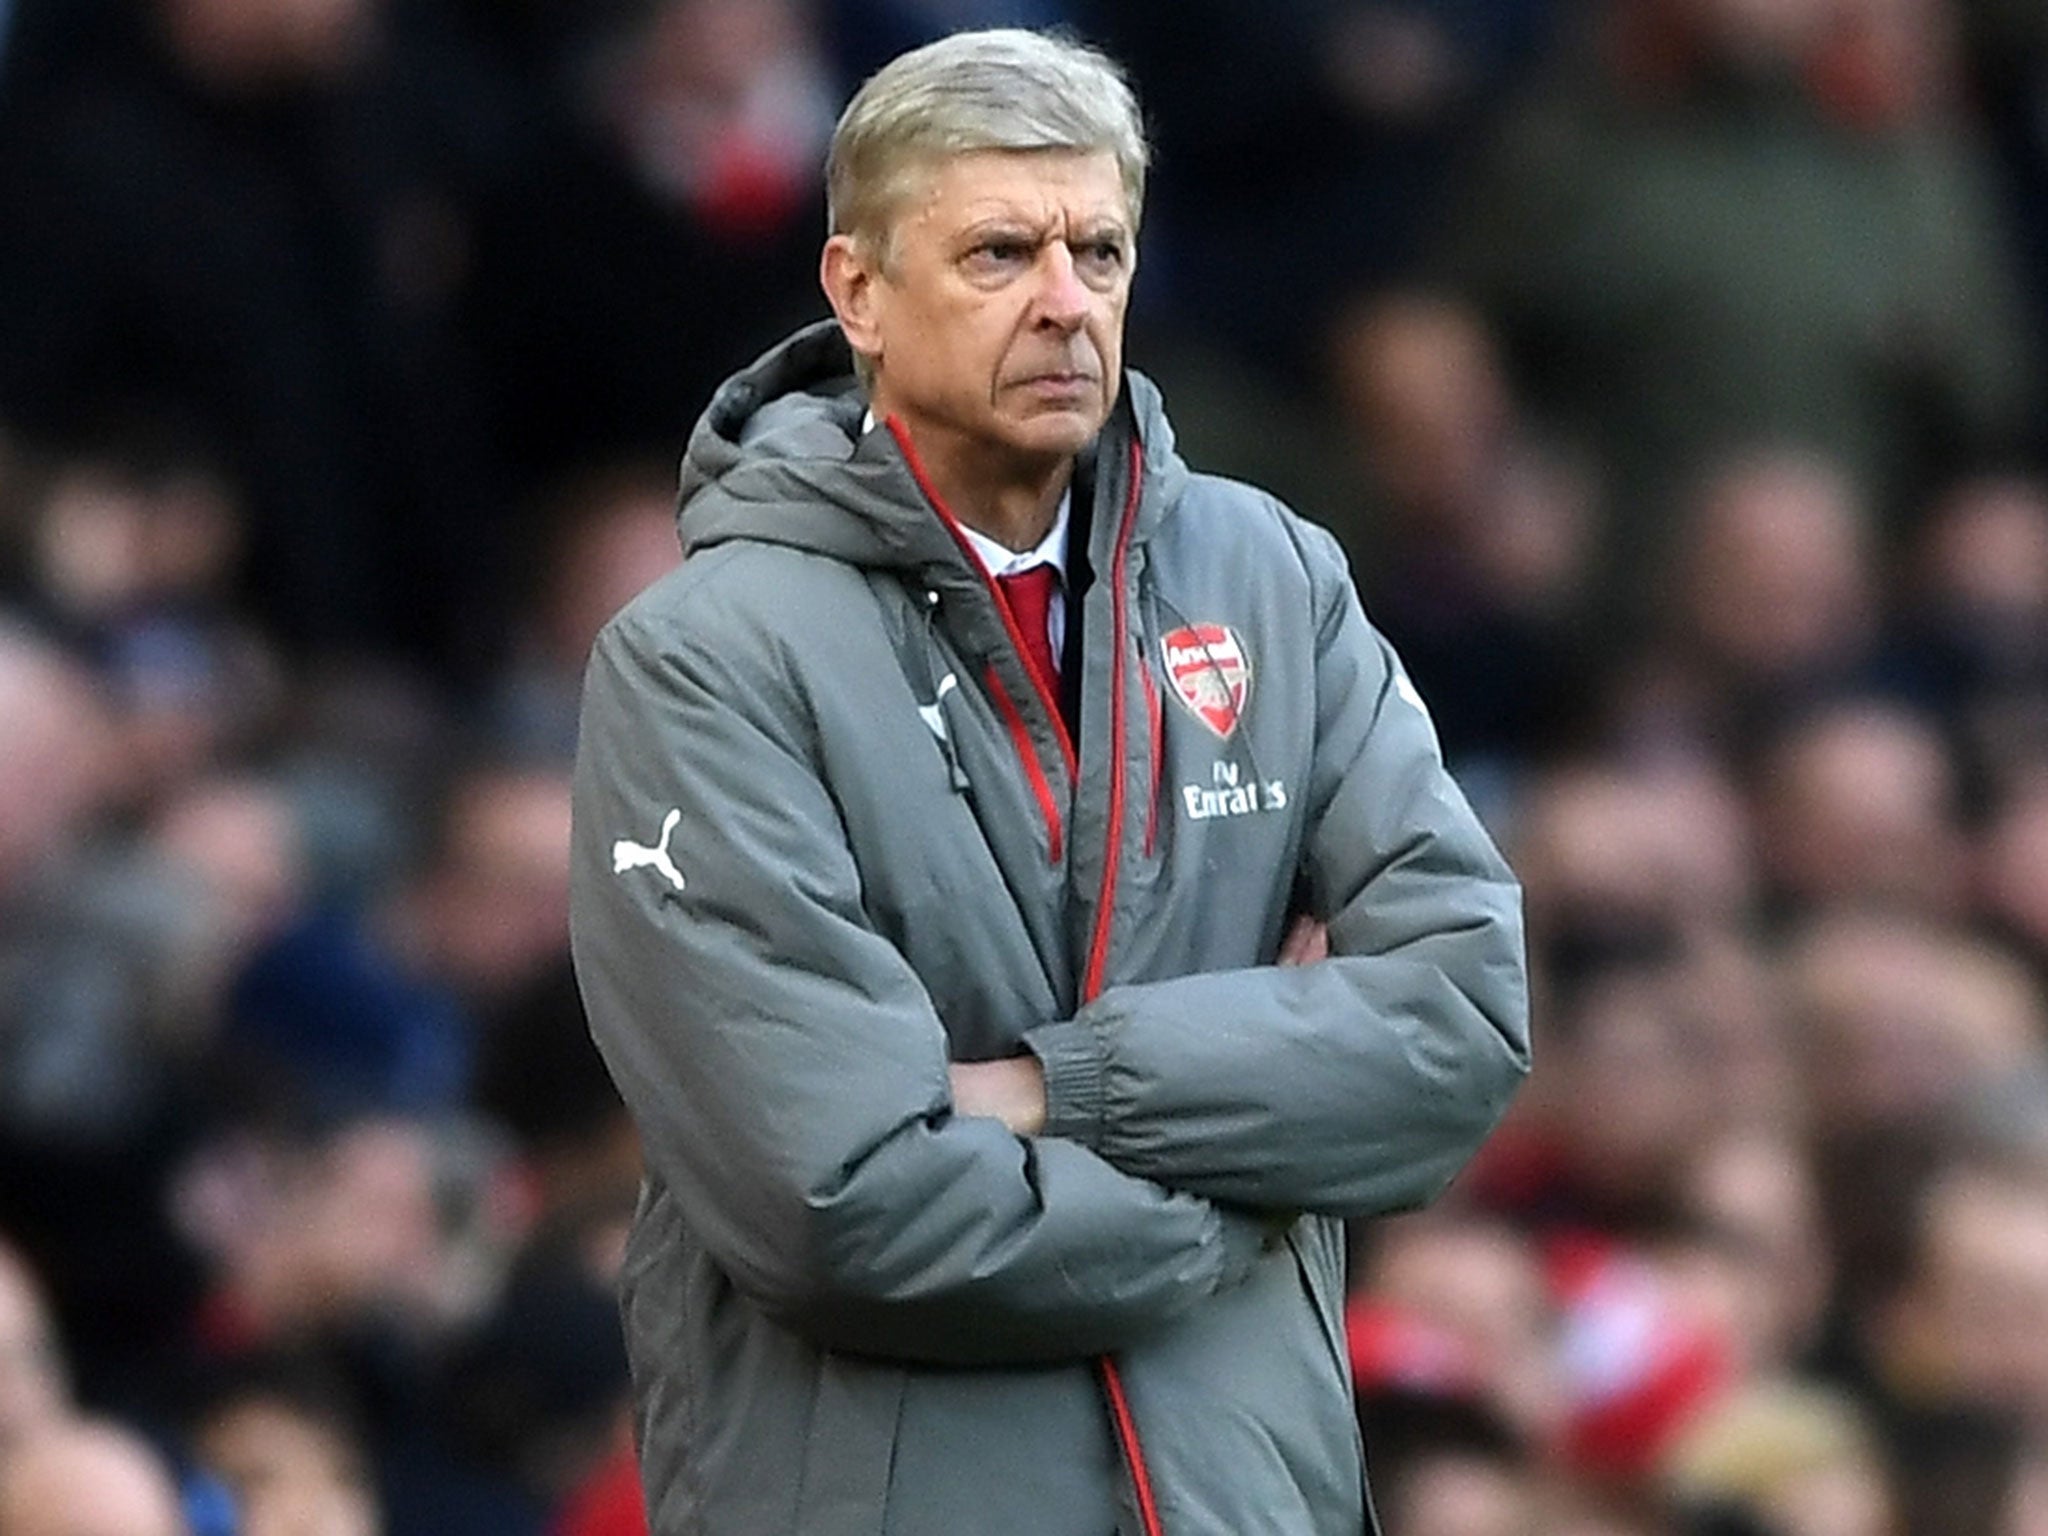 “In 20 years it is the most uneven Christmas period I’ve seen,” said Wenger